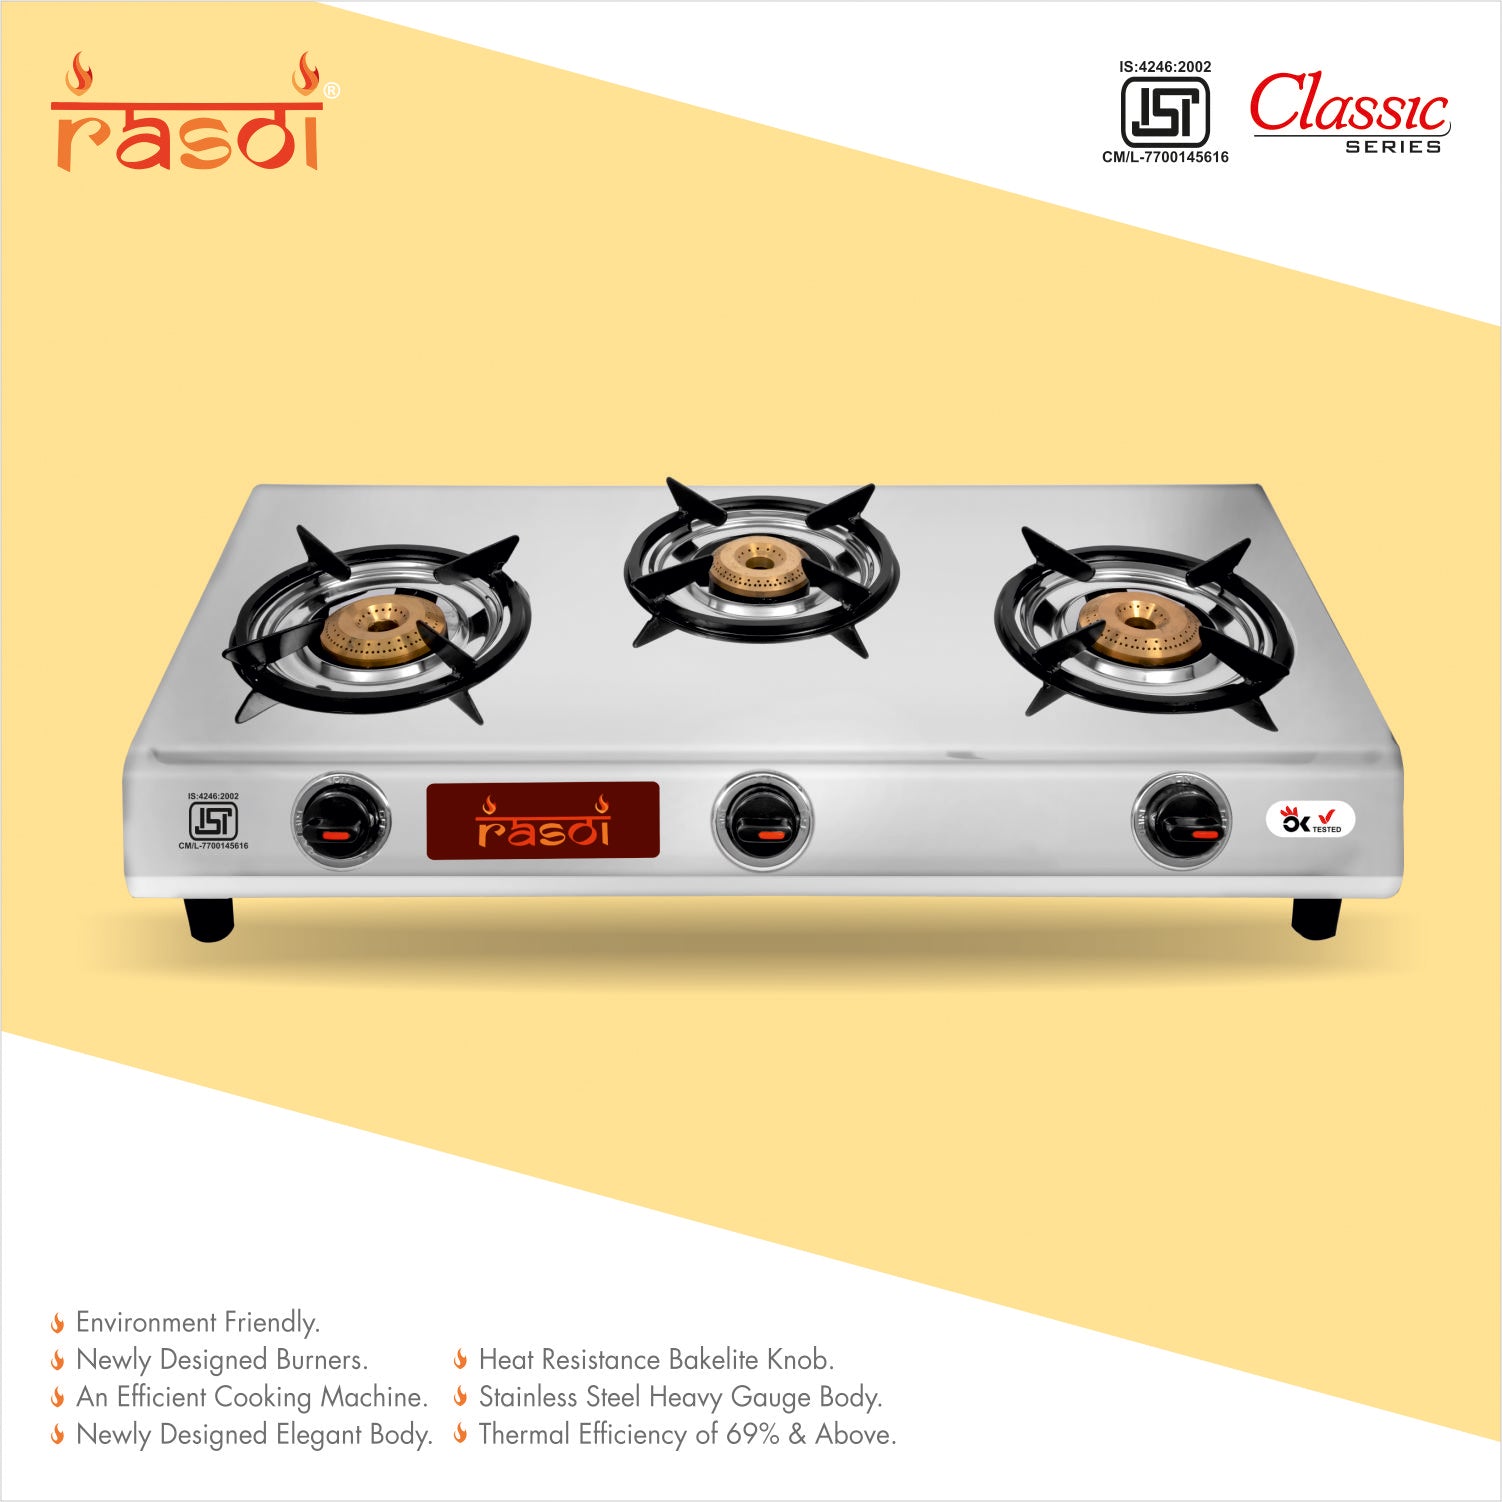 Rasoi Classic Stainless Steel 3 Burner Jumbo Gas Stove, Silver (ISI Certified)